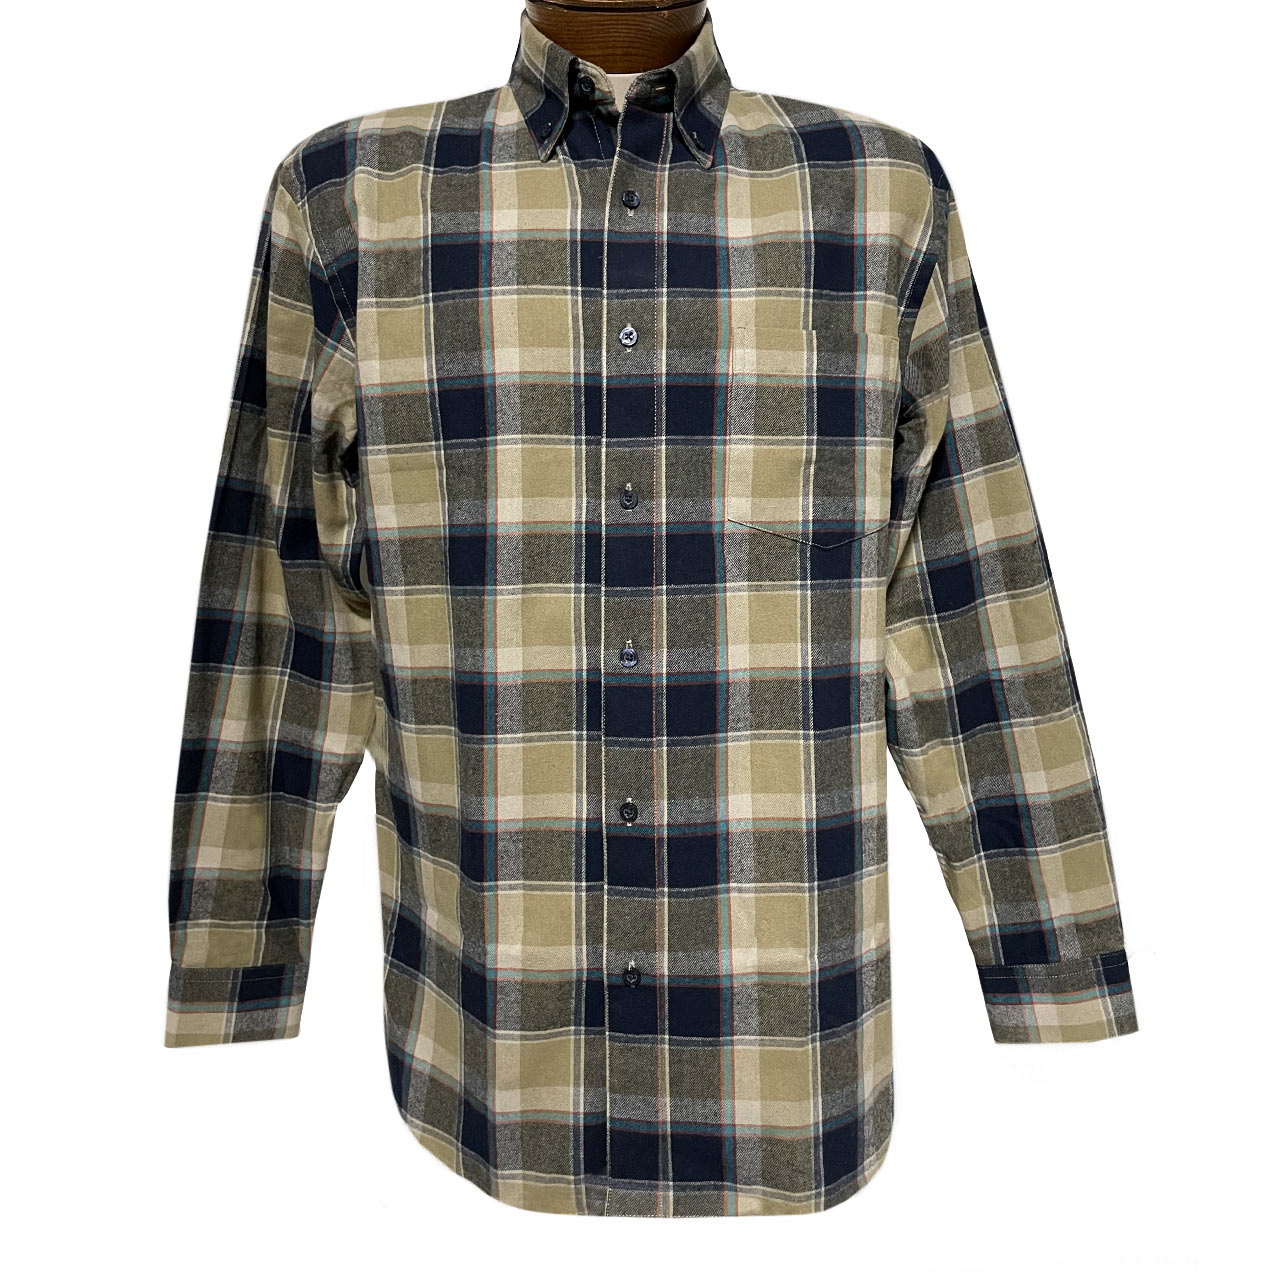 Men's F/X Fusion Long Sleeve Wrinkle Restante Brushed Flannel Plaid Shirt #FW1704, Olive/Multi